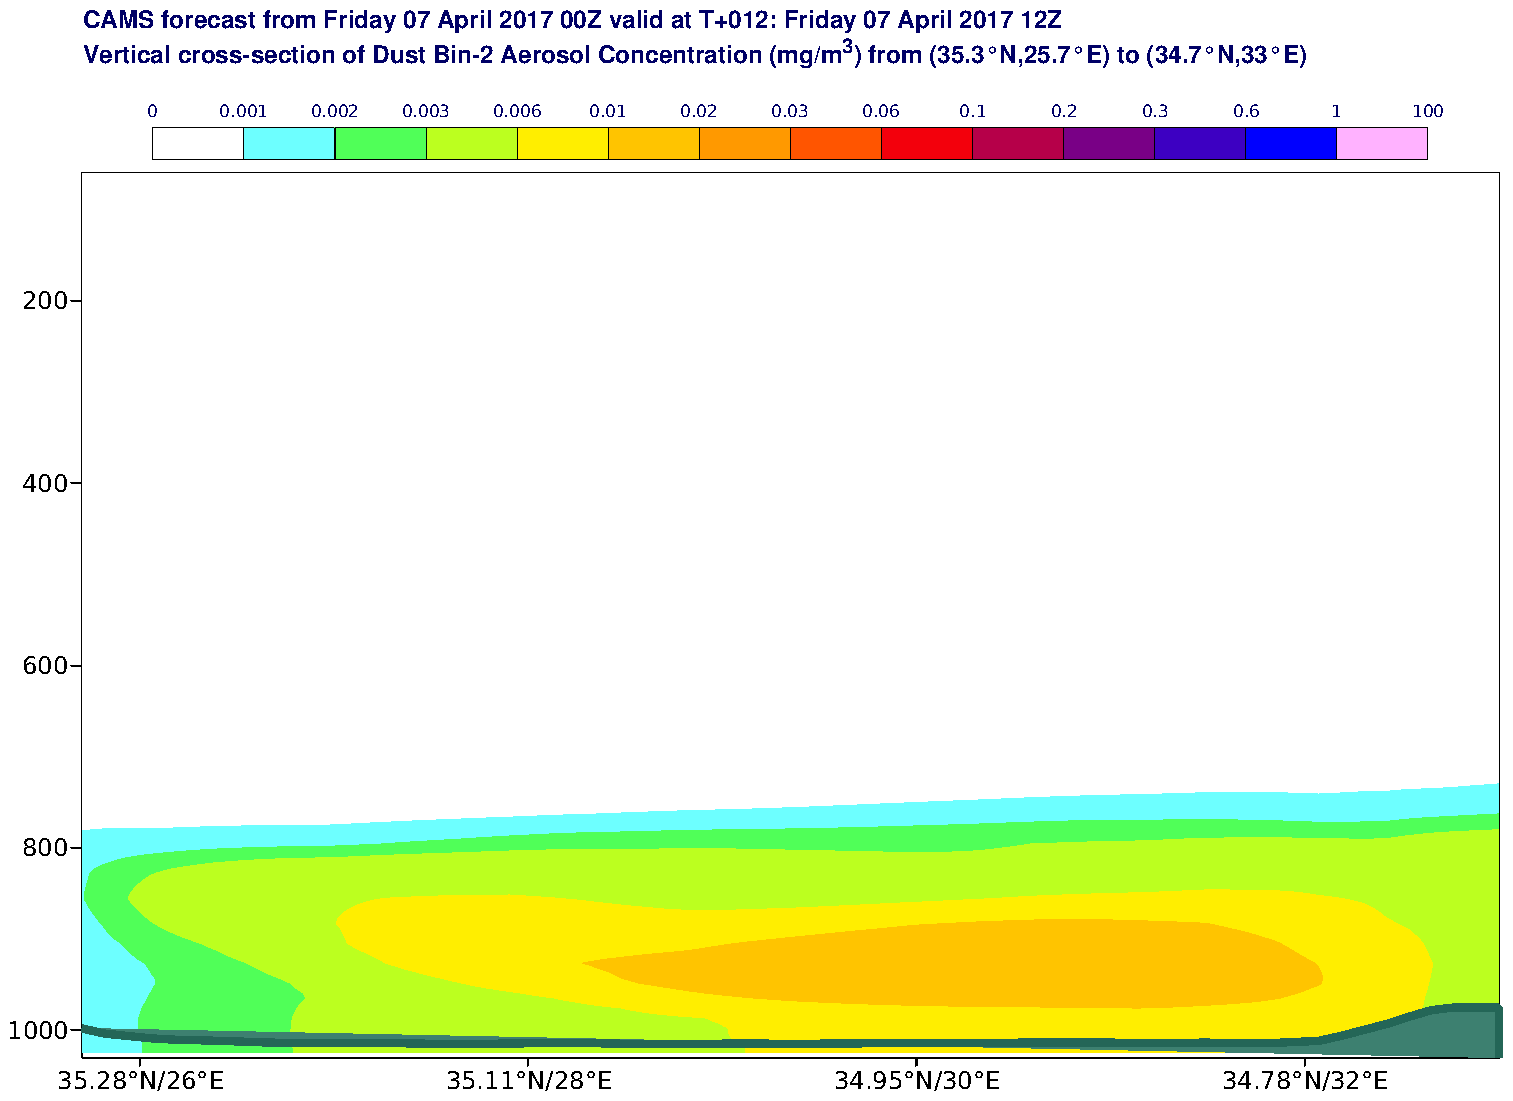 Vertical cross-section of Dust Bin-2 Aerosol Concentration (mg/m3) valid at T12 - 2017-04-07 12:00